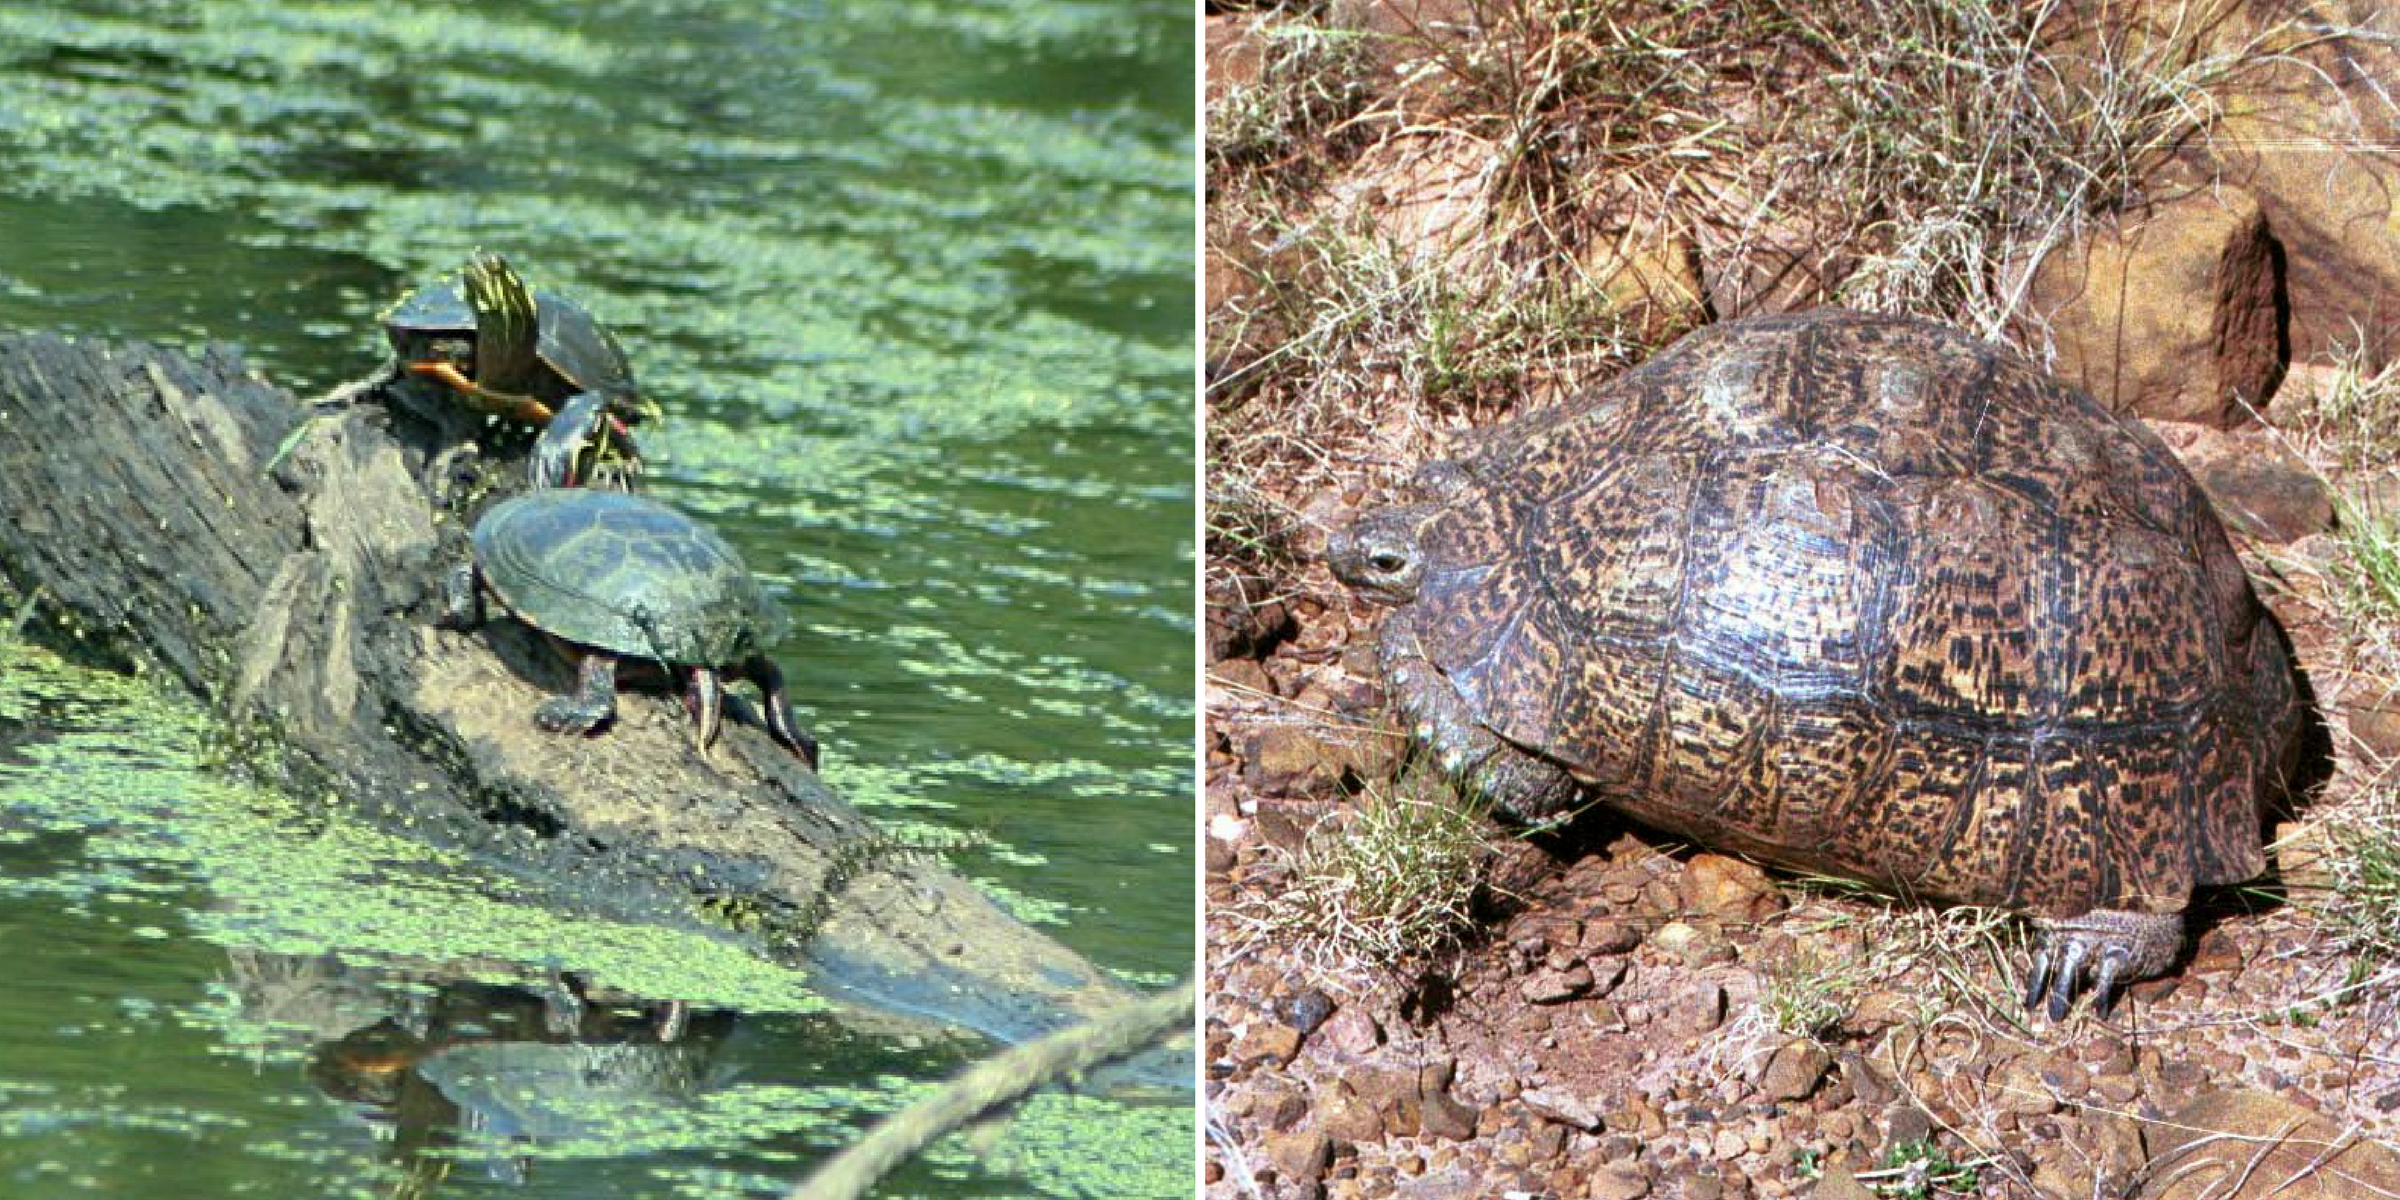 Left: Two green turtles on a log in a lake with green algae. Right: A large brown turtle with a tall shell sitting among rocks and grass.